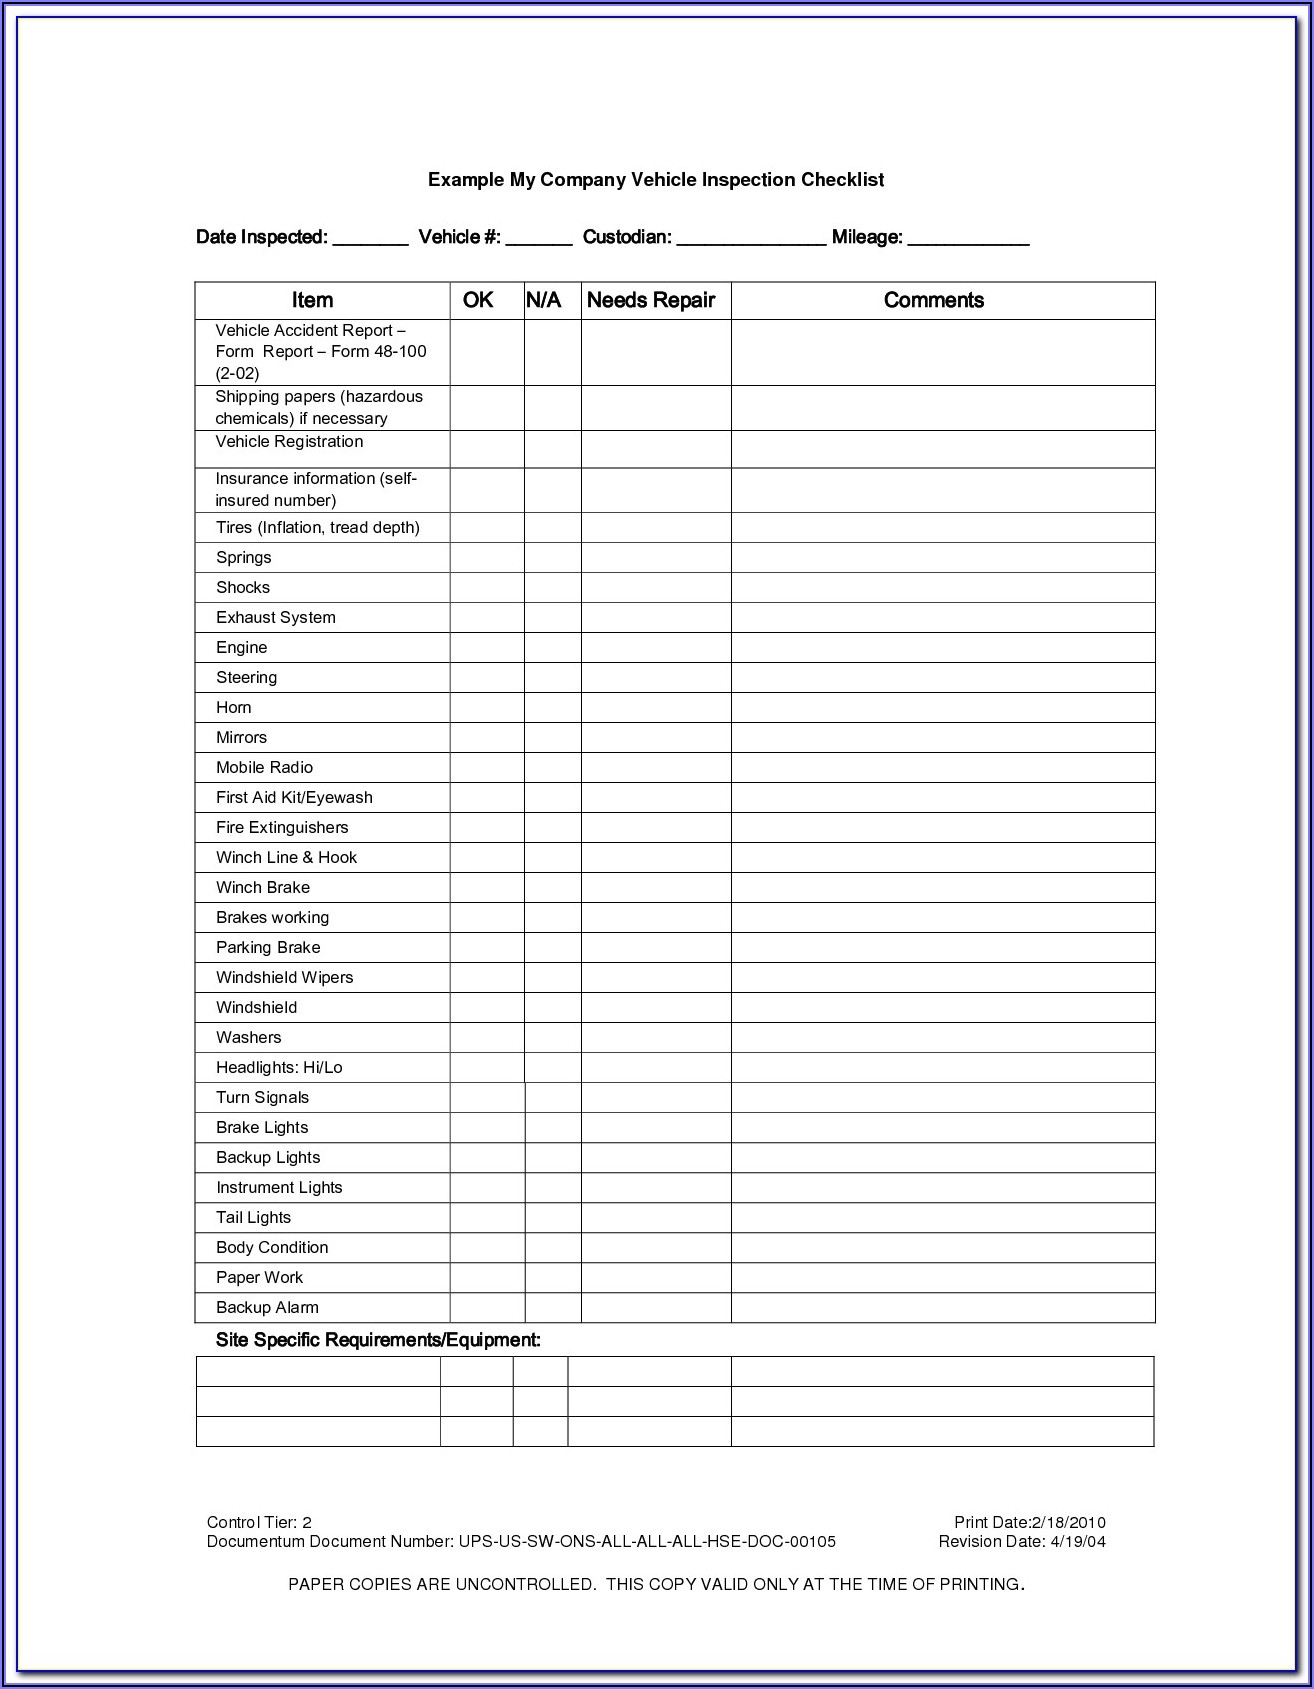 Annual Vehicle Inspection Report Template Free